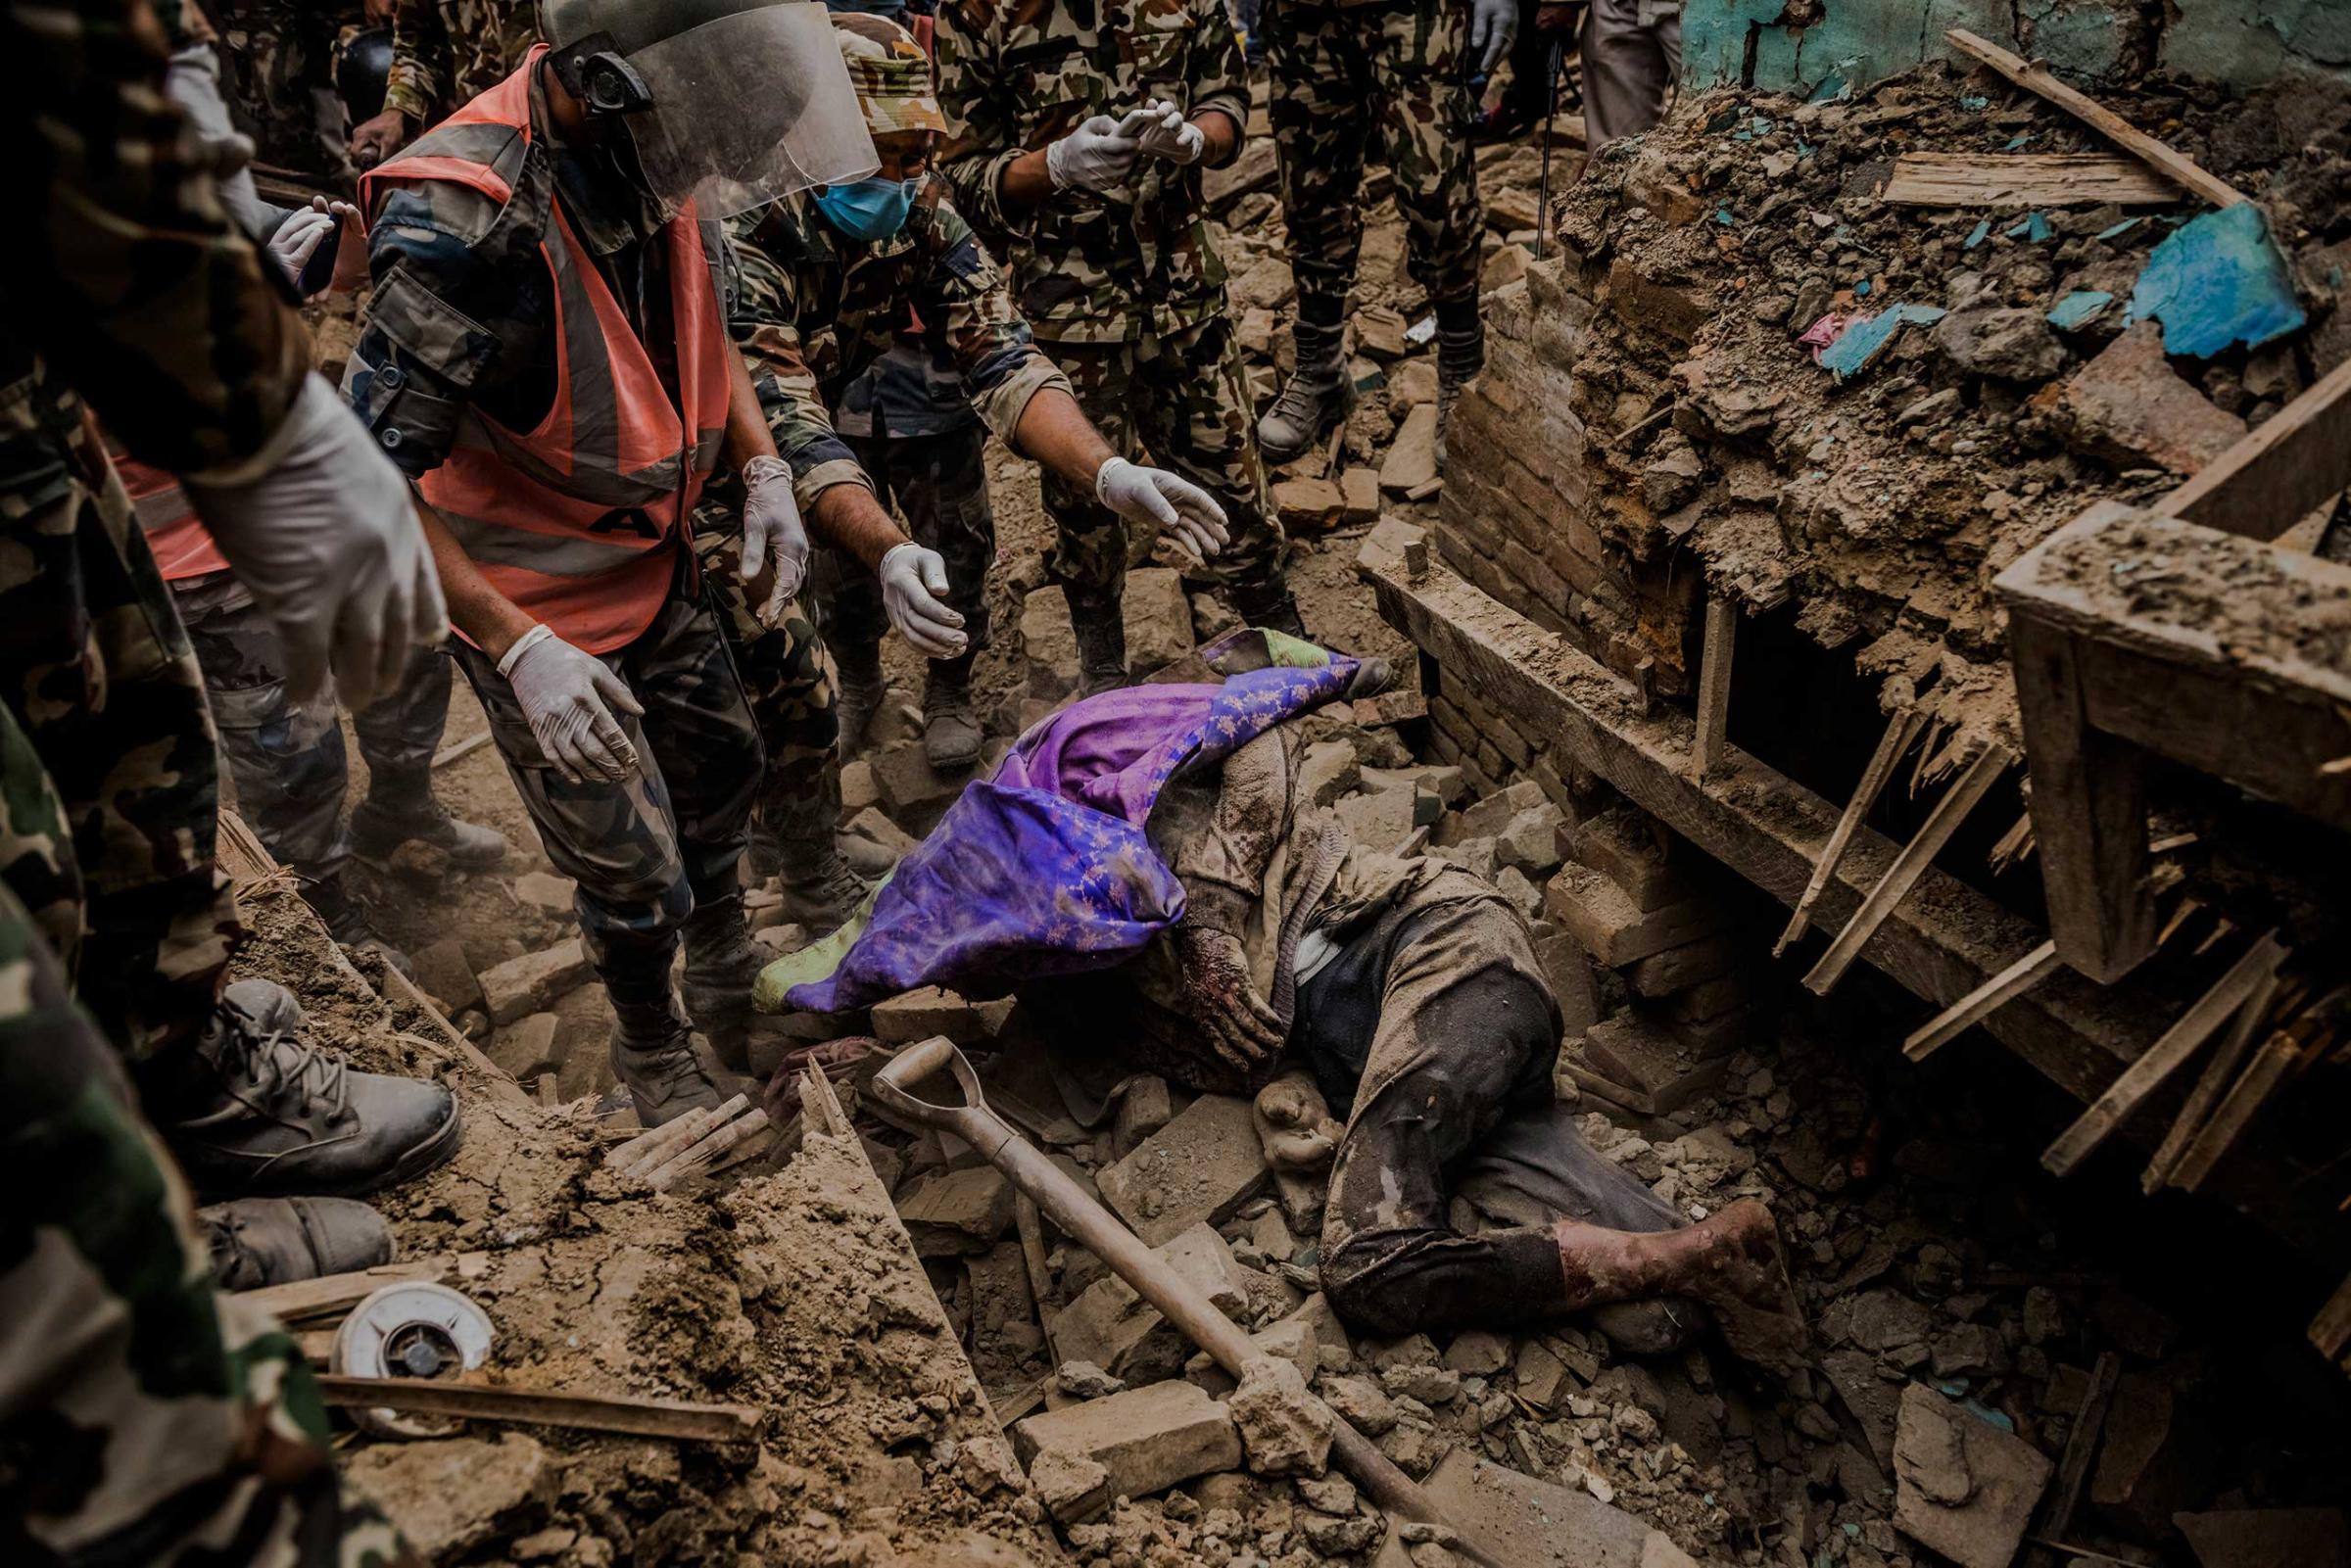 Members of a Nepalese rescue team worked for hours to locate and retrieve the body of an earthquake victim from the ruins of his home in Bhaktapur, Nepal. The April 25 quake killed over 8,000 people and injured more than 21,000. April 29, 2015.